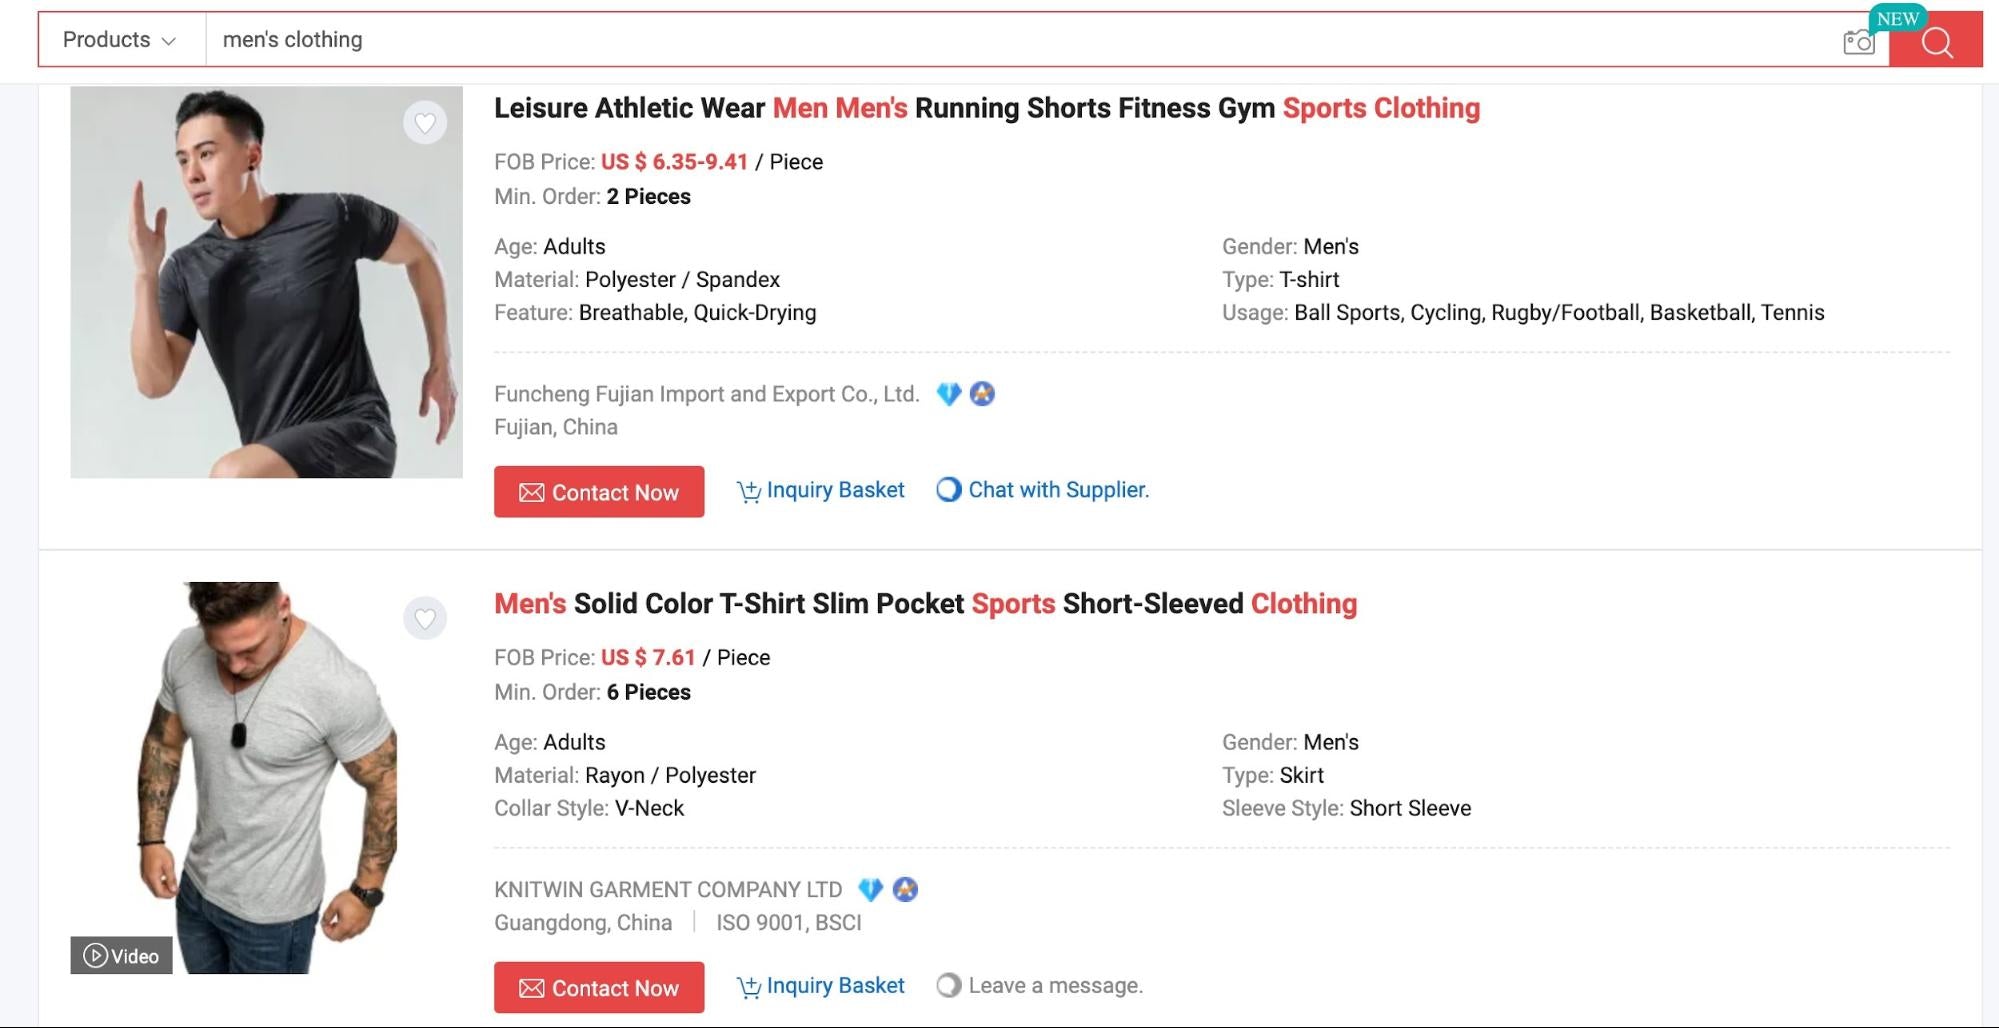 Image of Made-in-China wholesale marketplace showing results for “men’s clothing” query